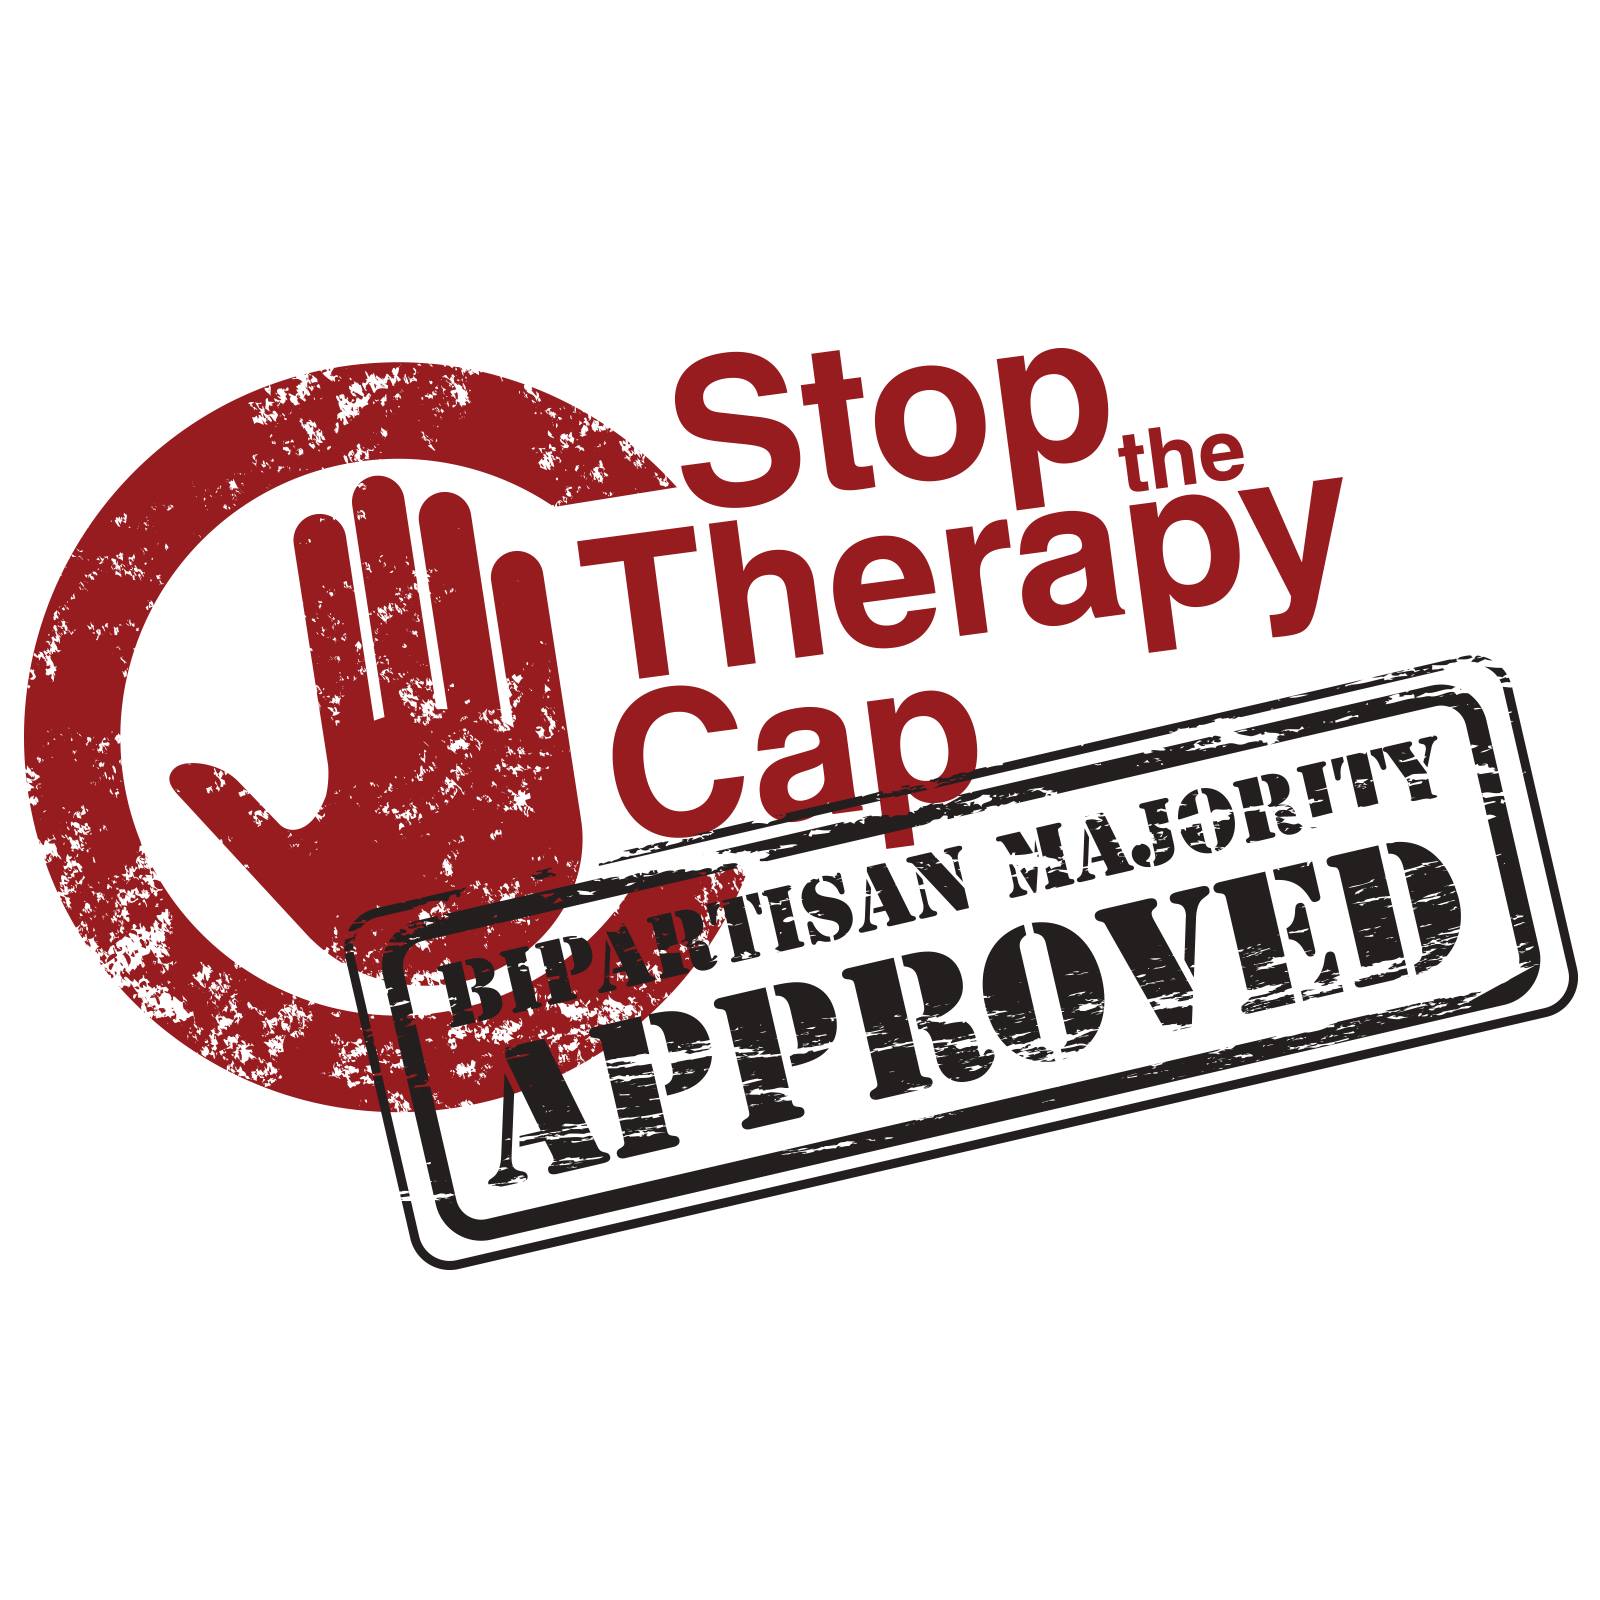 Huge O Logo - The Therapy Center. HUGE milestone in therapy cap repeal